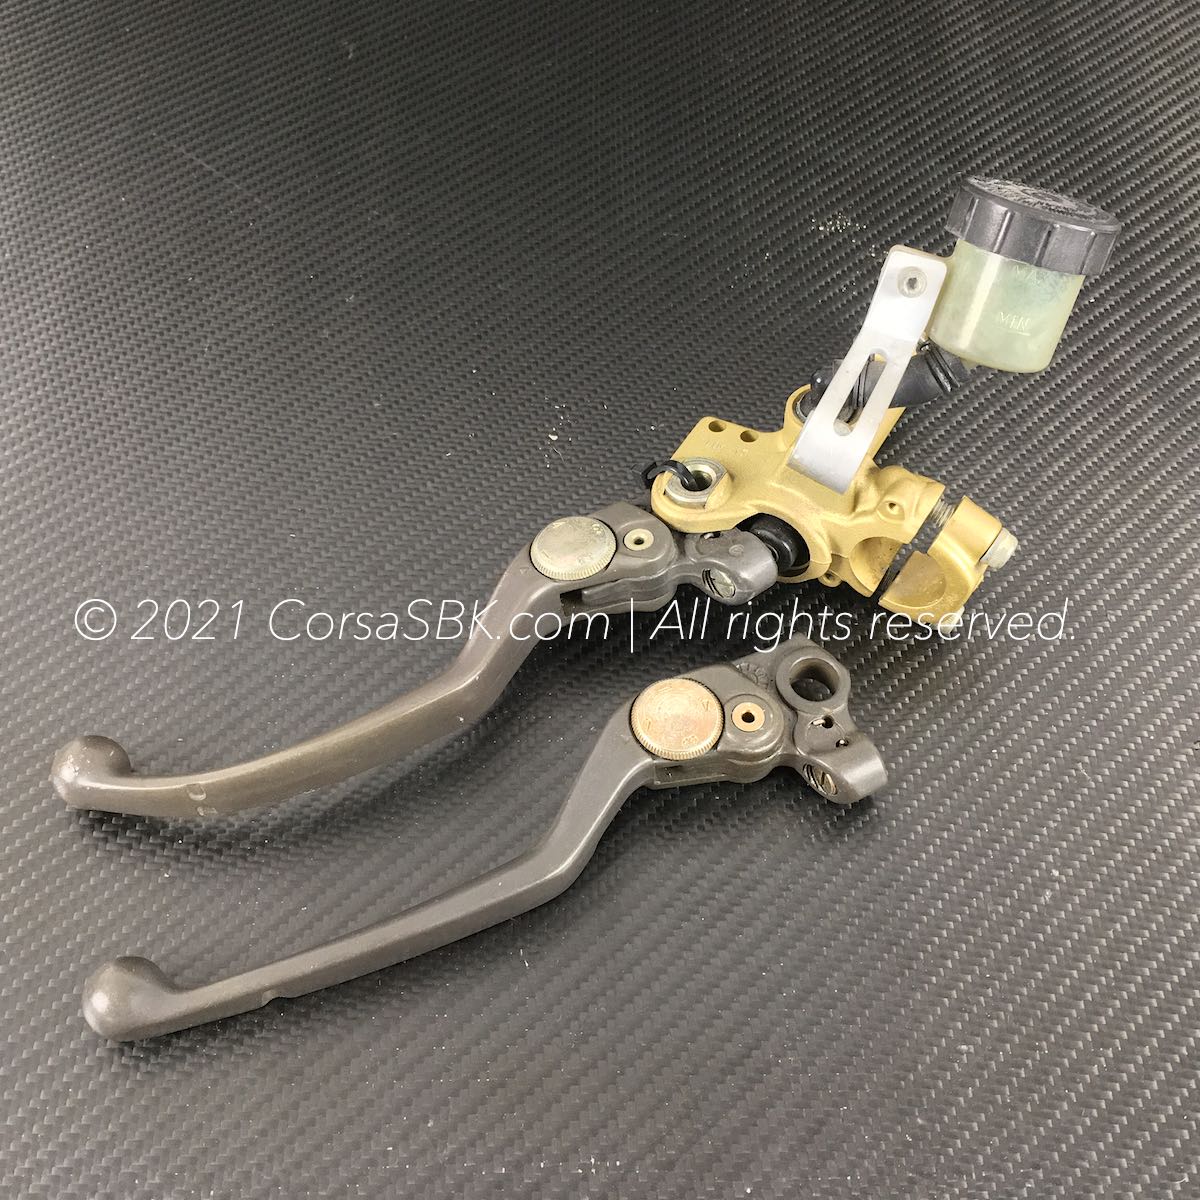 NEW silver front brake & clutch lever pair set Ducati 748 916 996 94-98 95 96 97 